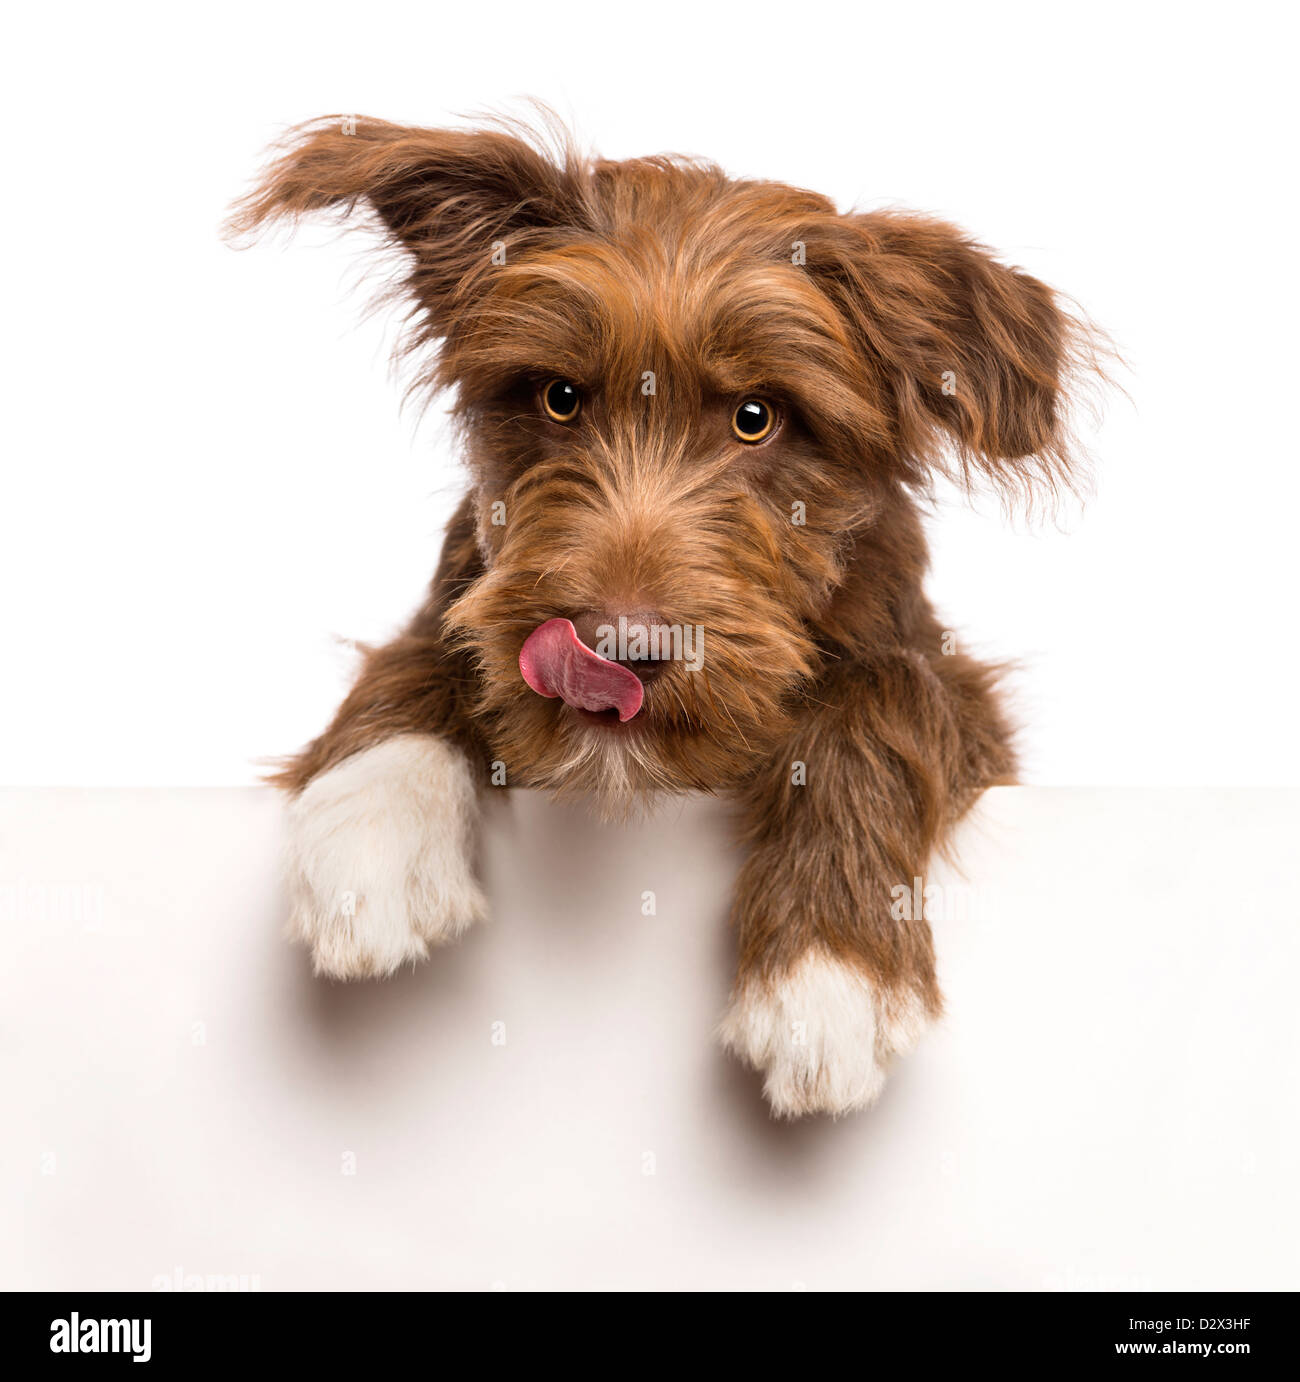 Crossbreed, 5 months old, leaning on a white panel and lick his lips against white background Stock Photo